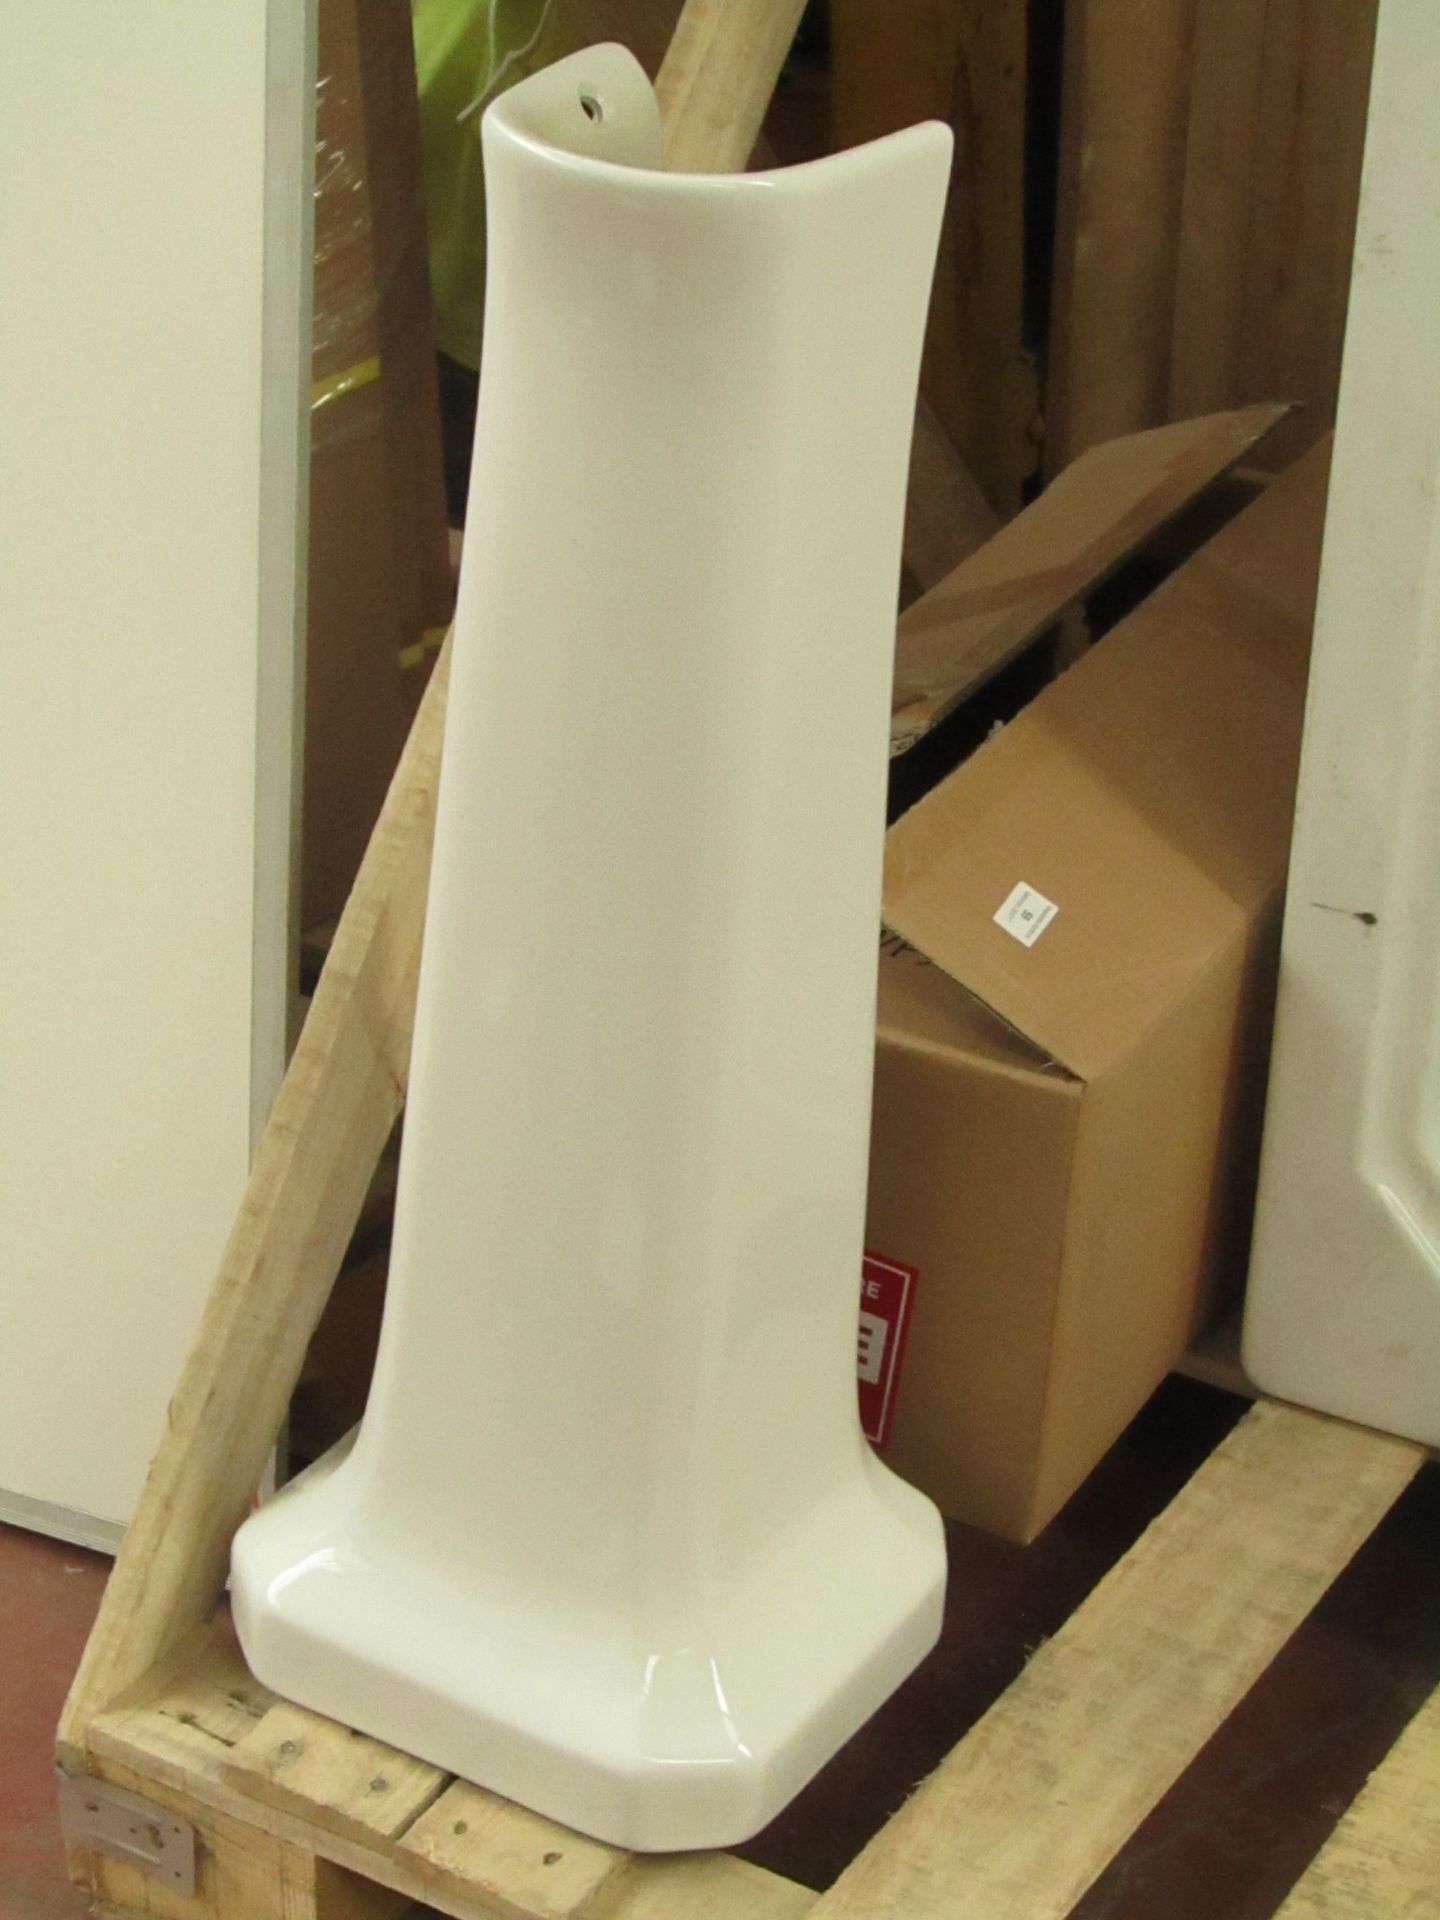 Camberley Full Pedestal. New & boxed.